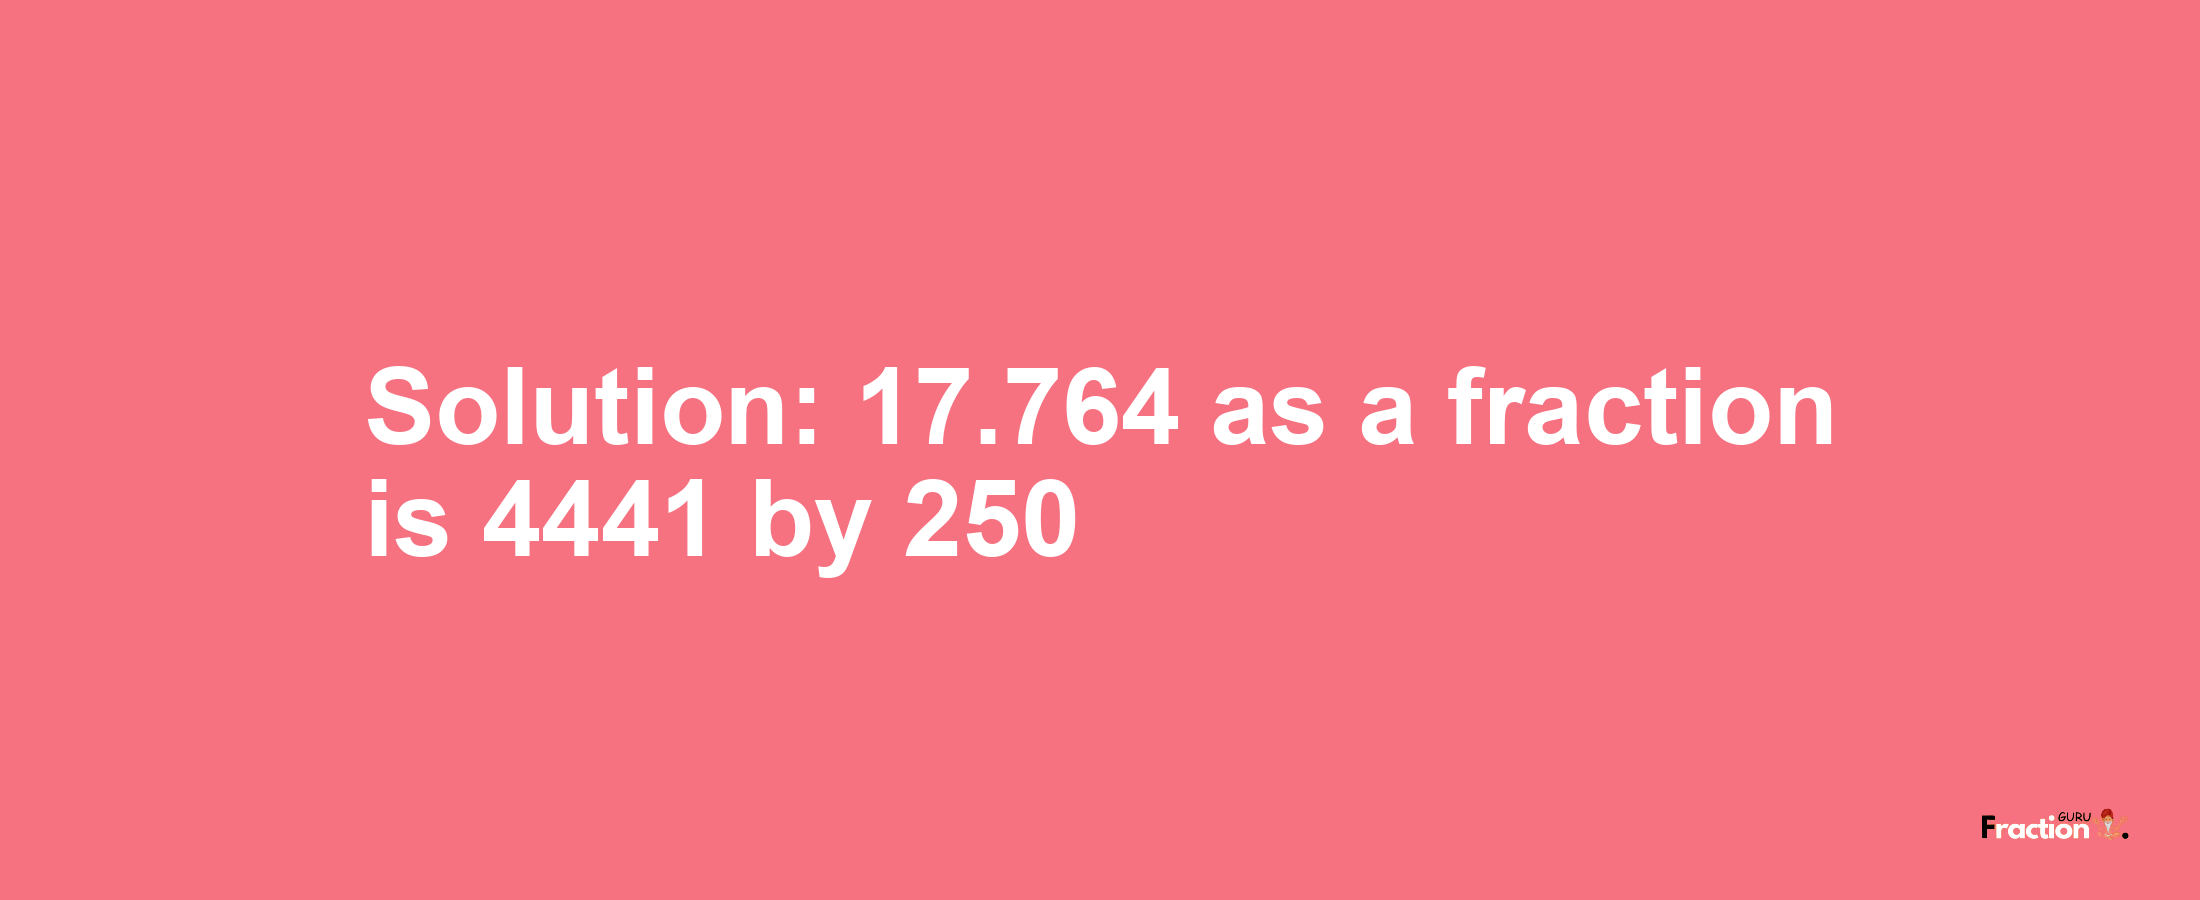 Solution:17.764 as a fraction is 4441/250